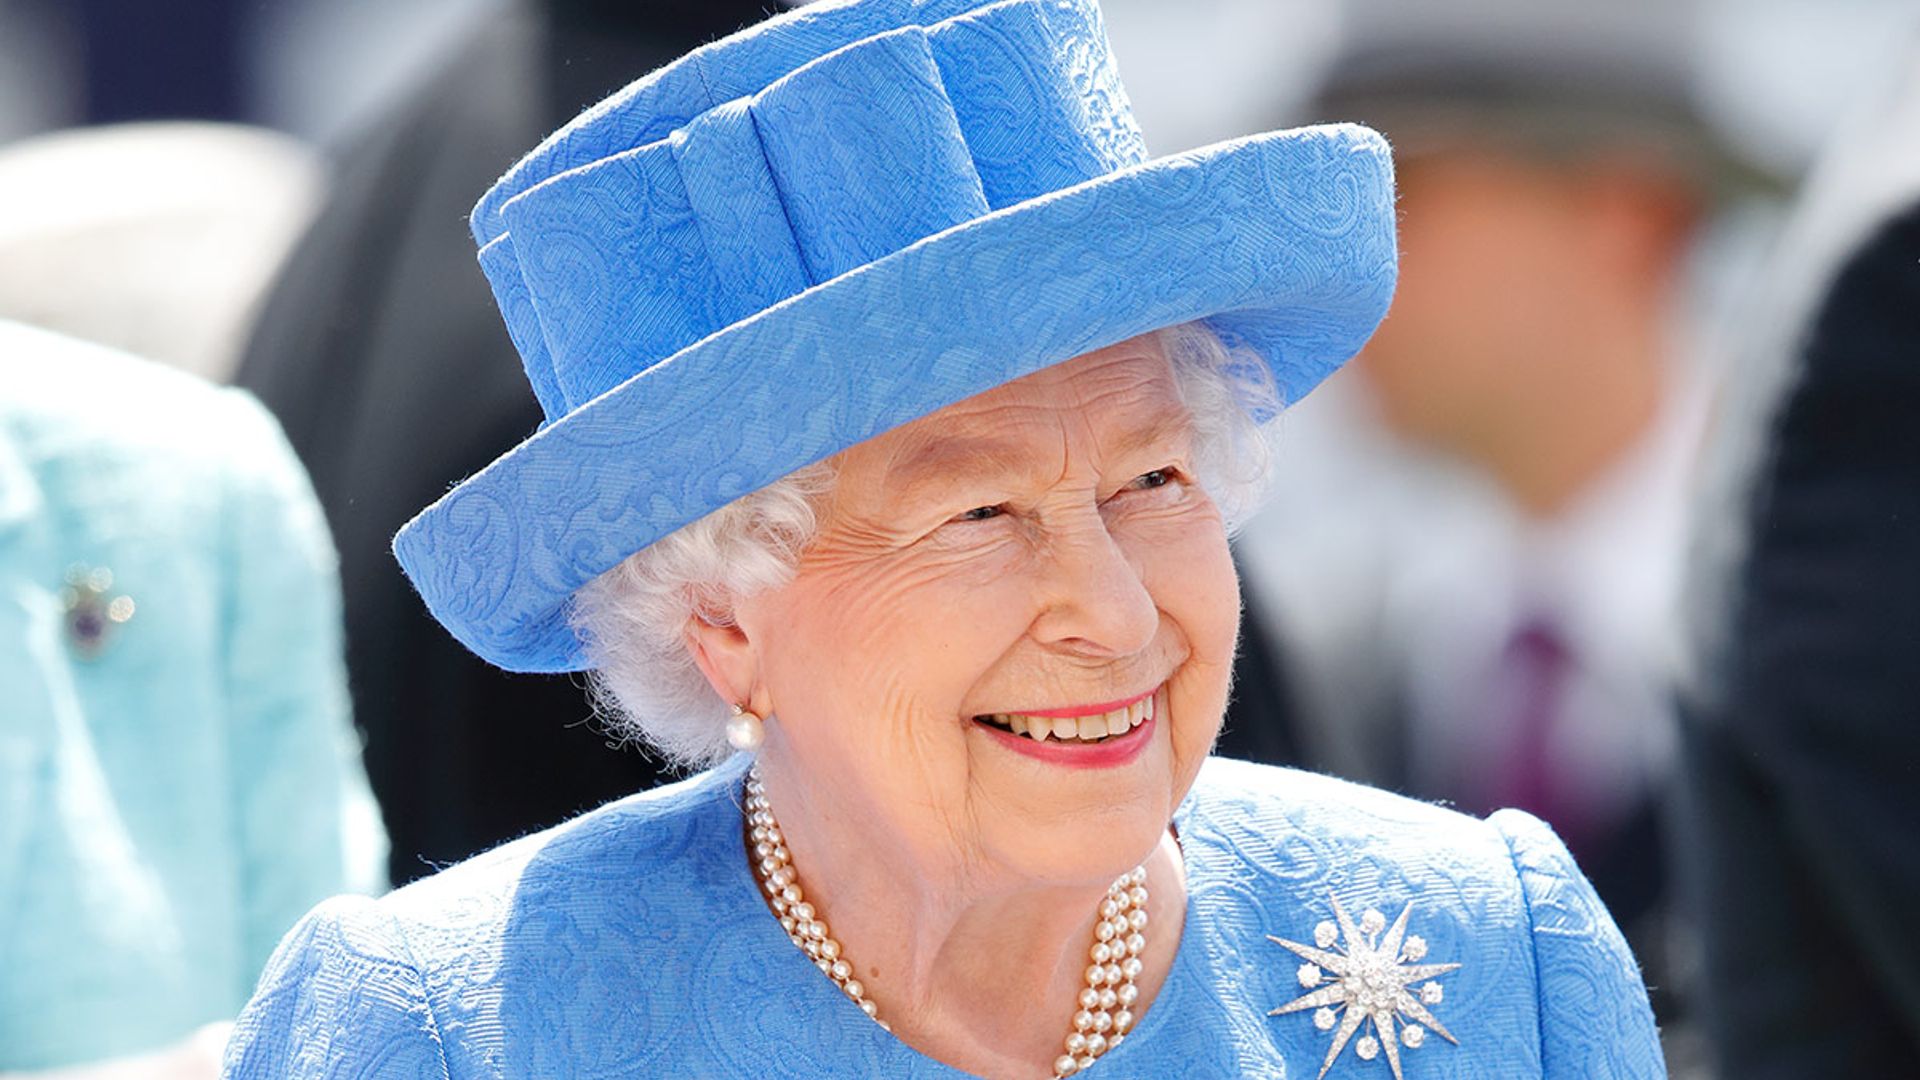 the queen smiling in blue